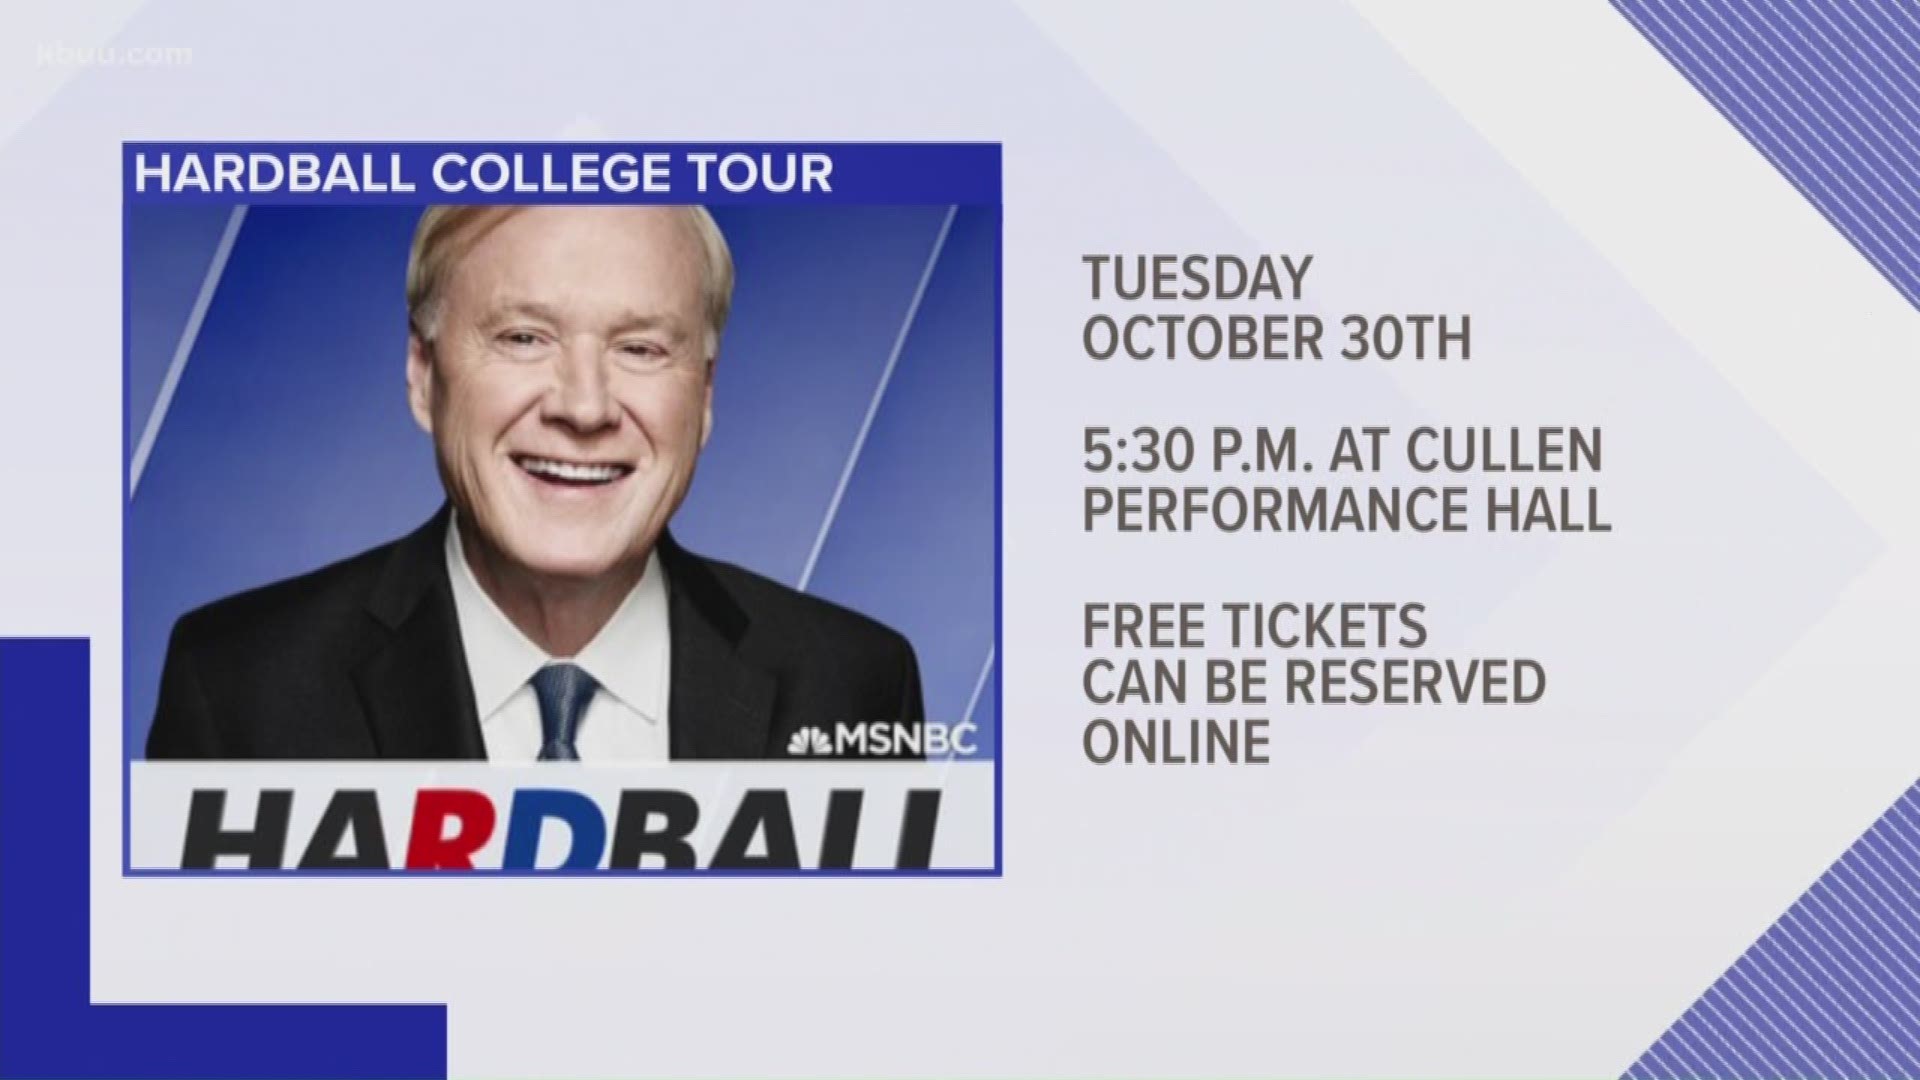 MSNBC host Chris Matthews is coming to UH next week to tape an hour-long interview with Senate candidate Beto O'Rourke.